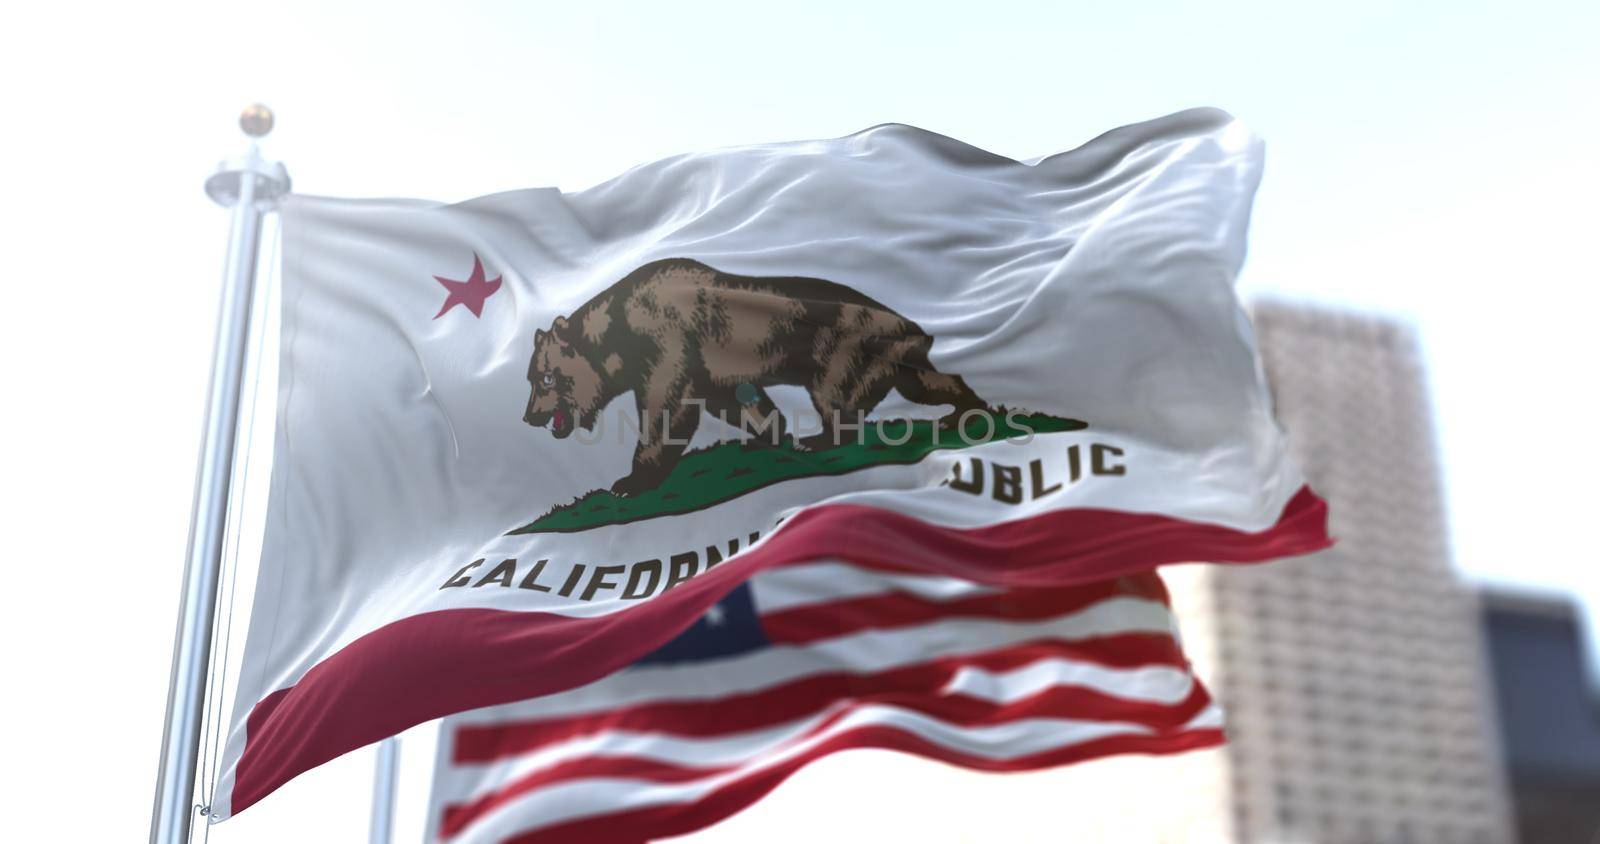 The California Republic flag with the grizzly bear Monarch flying along with the American national star-striped flag. by rarrarorro